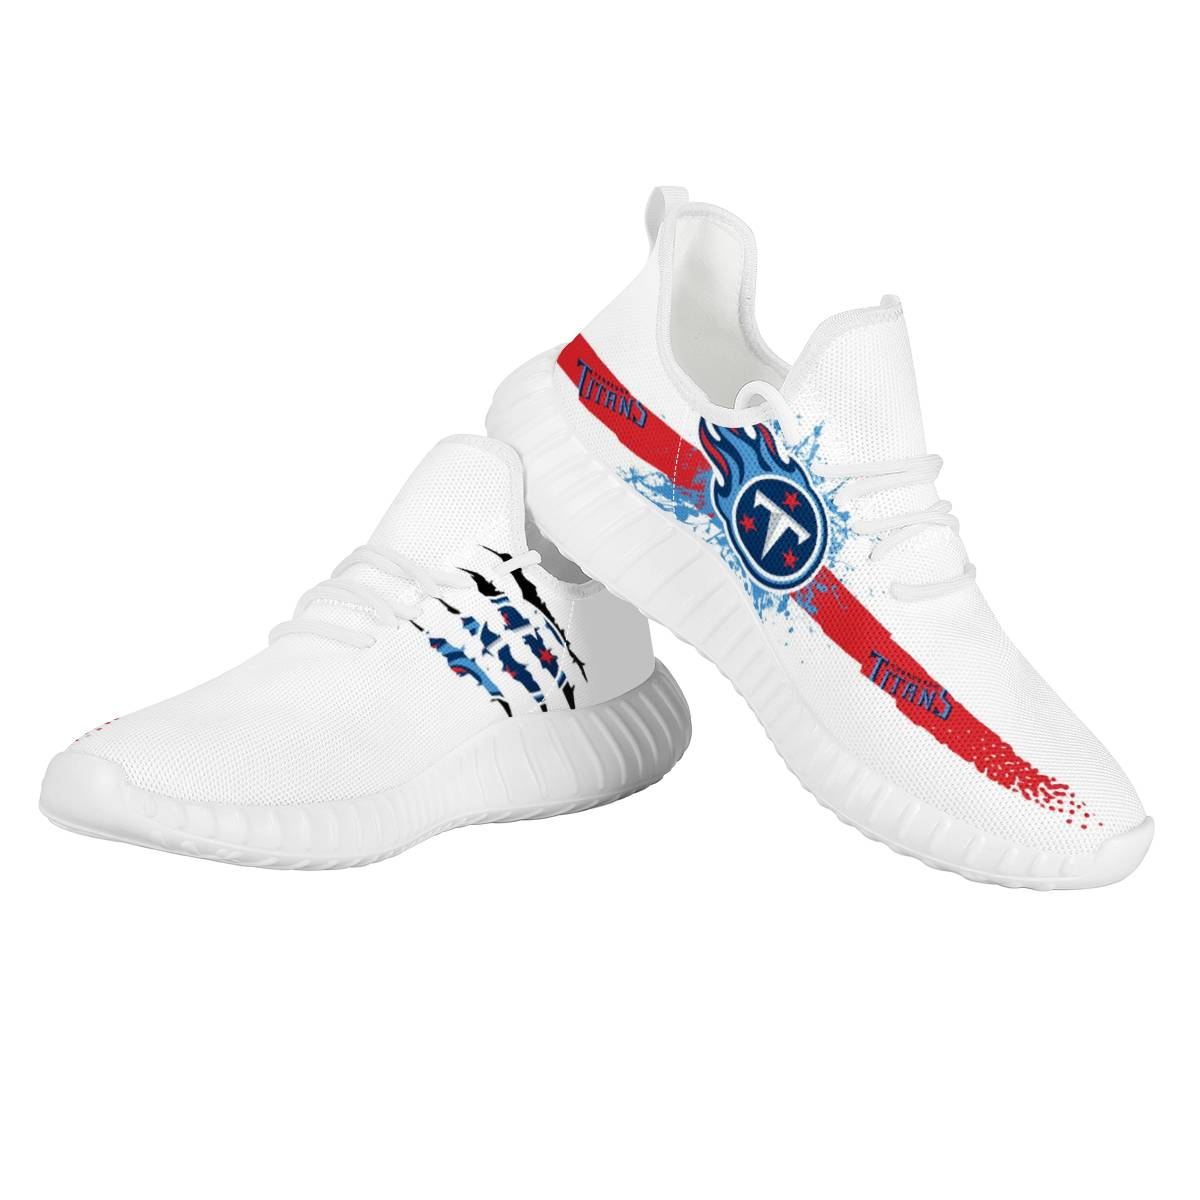 Men's Tennessee Titans Mesh Knit Sneakers/Shoes 005